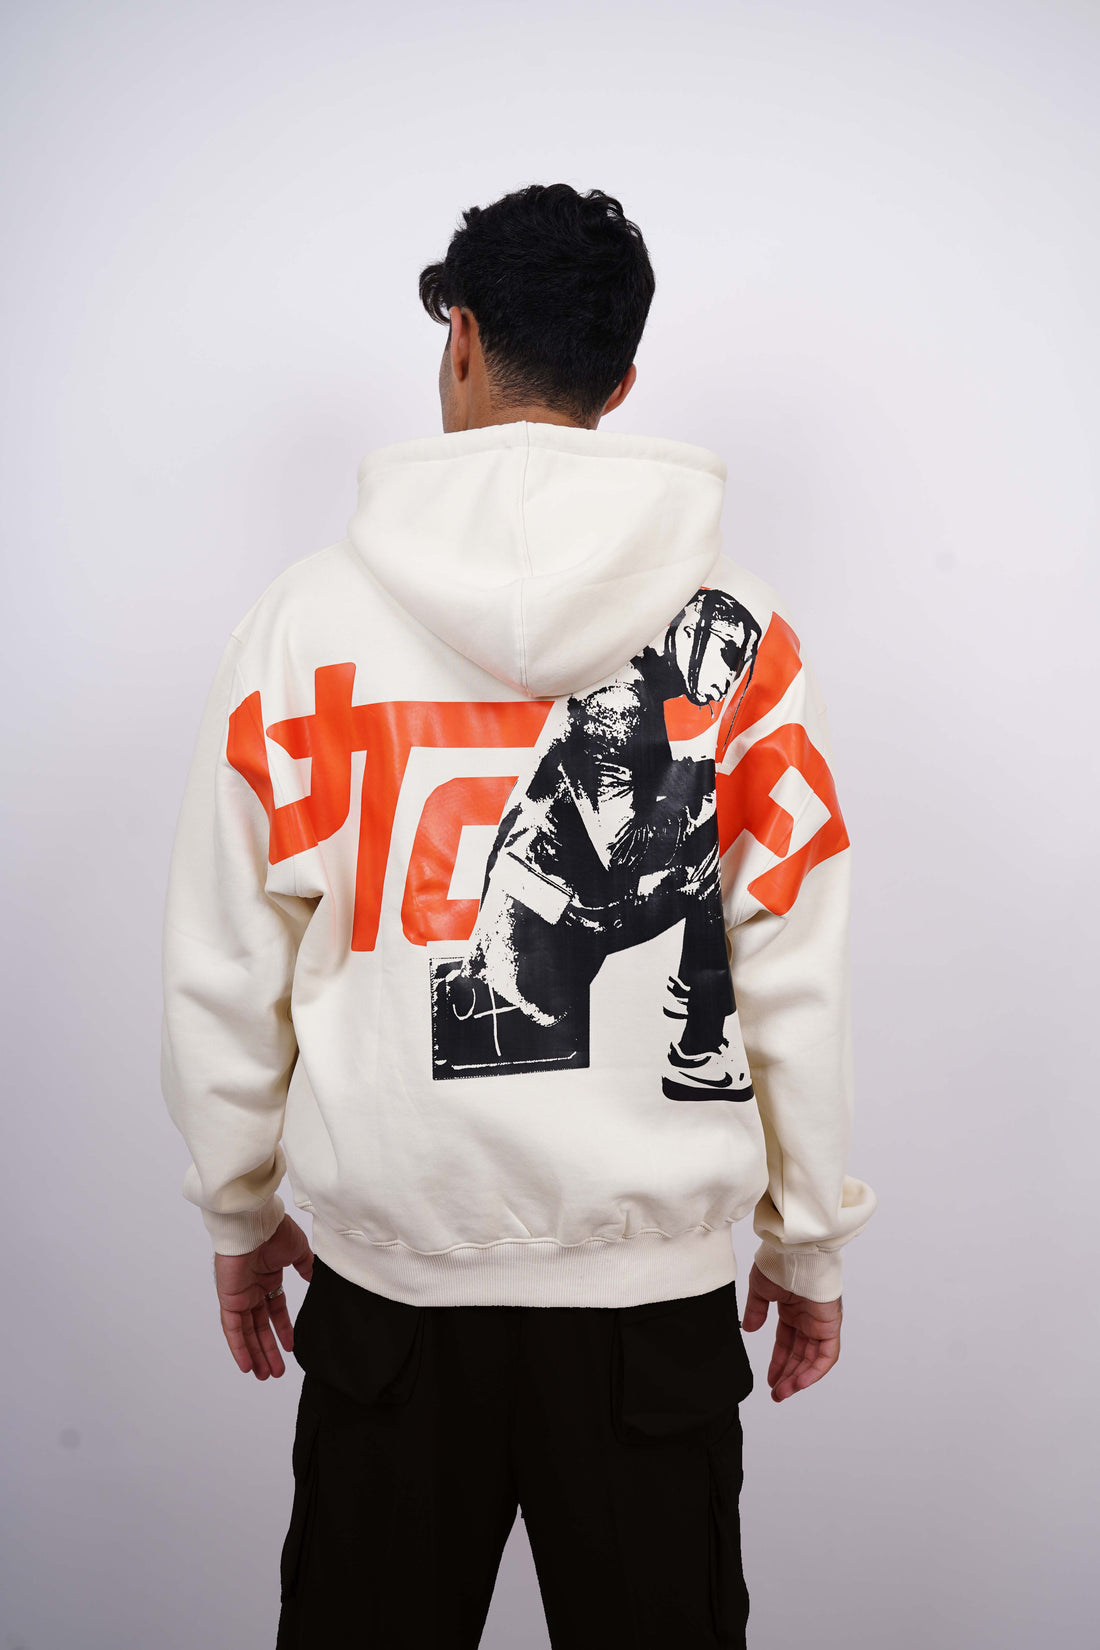 Travis Scott: The Utopia briefcase 2.0 Heavyweight Baggy Hoodie For Men and Women